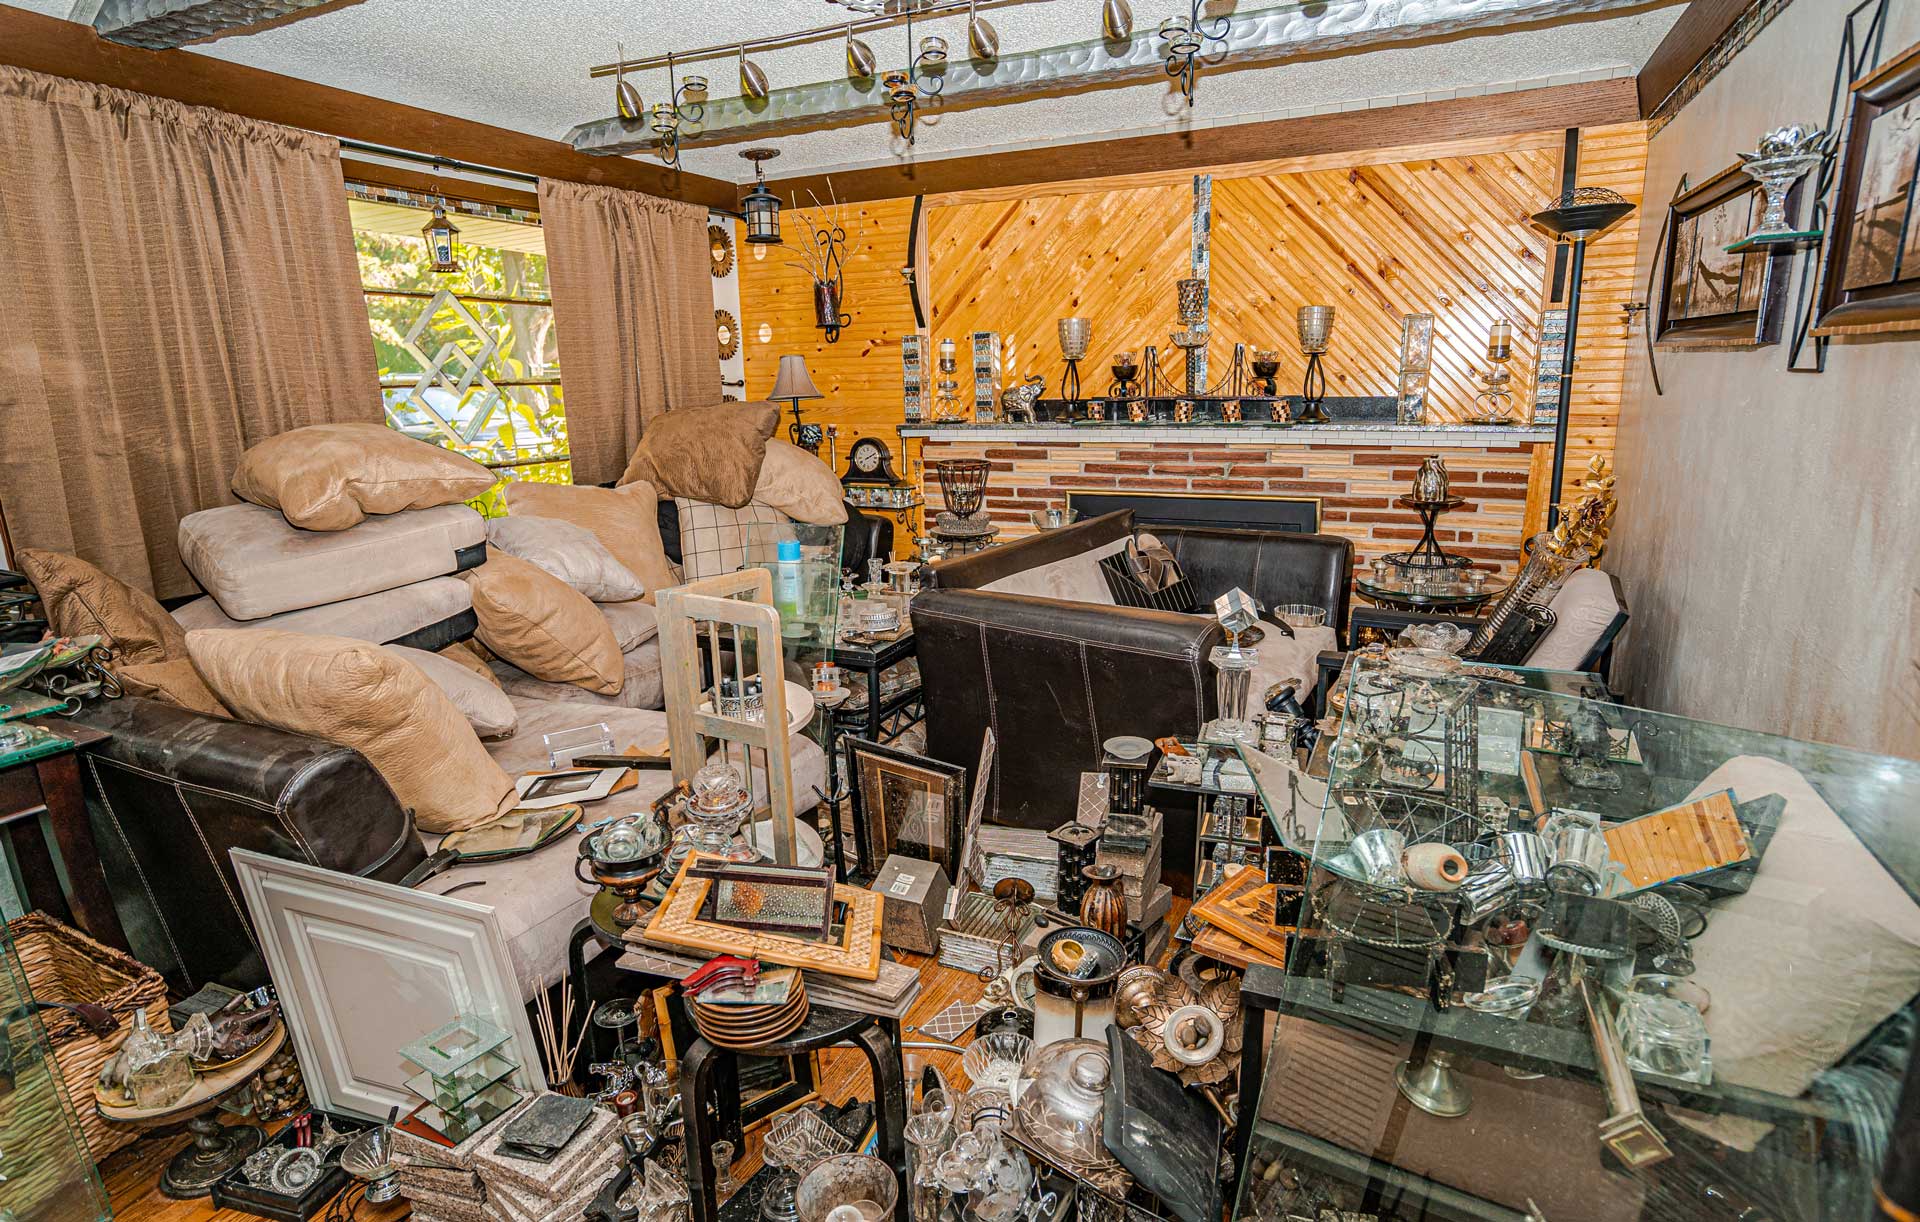 Den in hoarder's home, piled high with junk